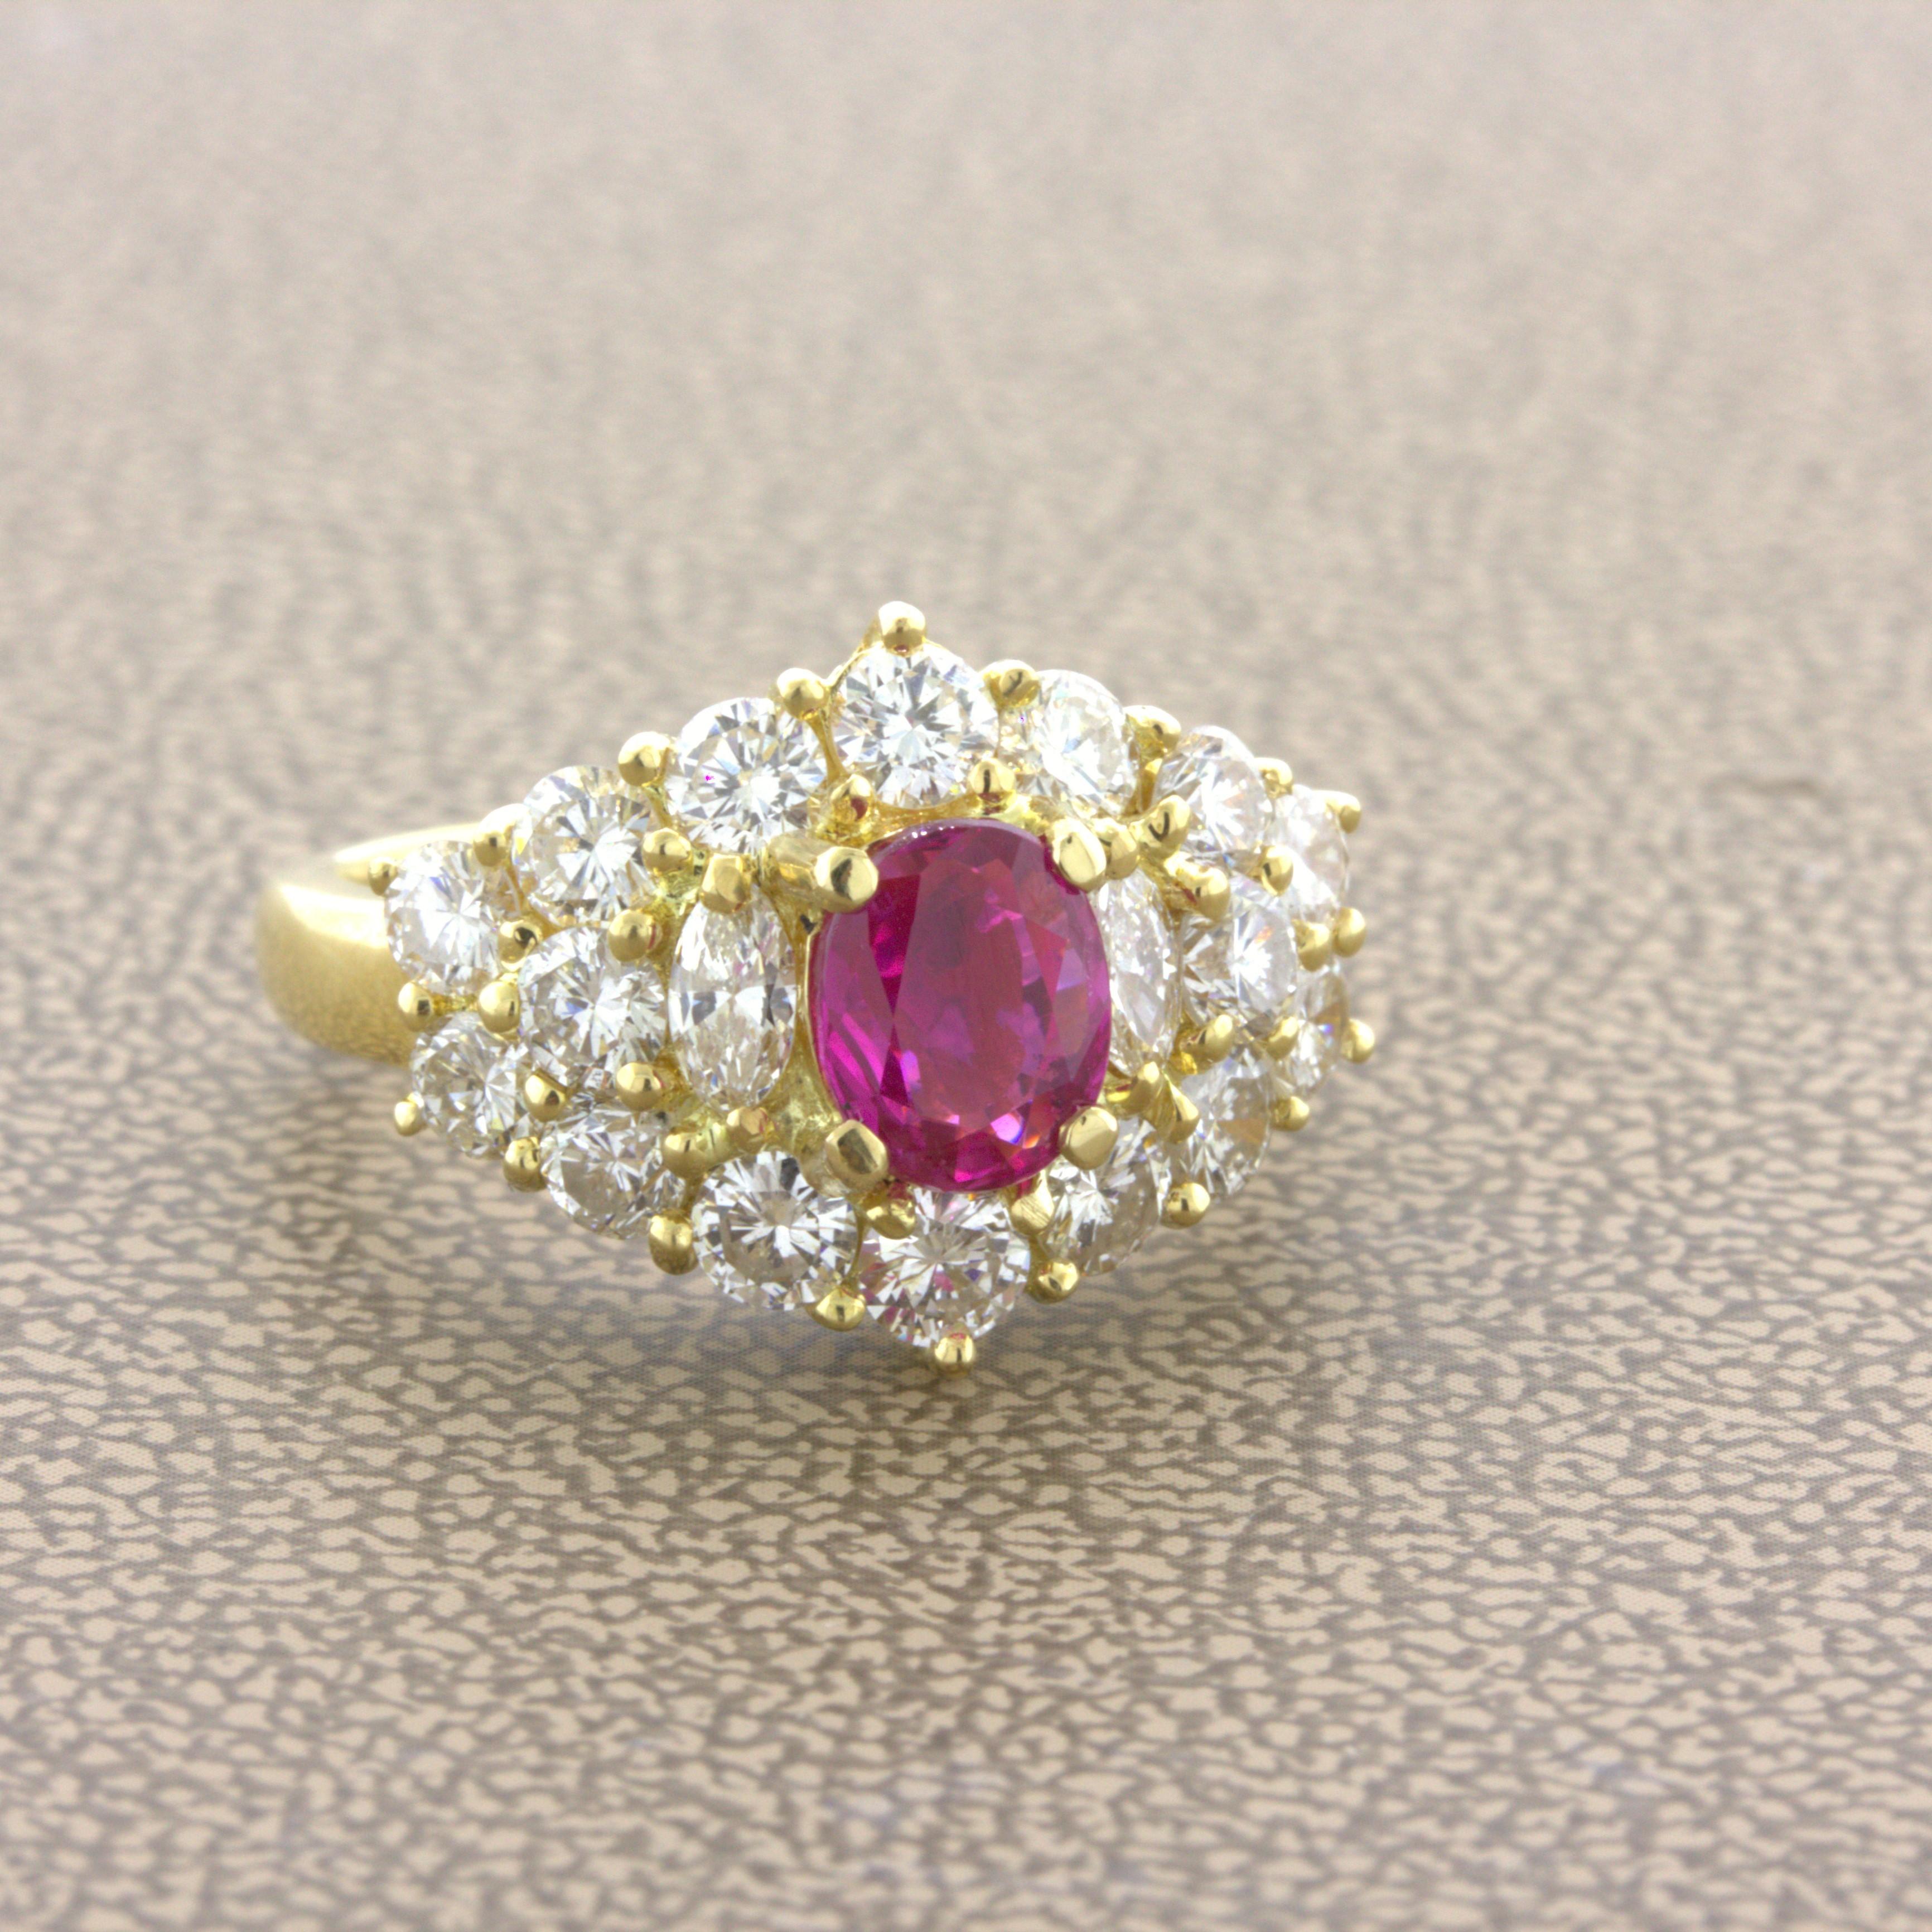 A beautiful and rare gemstone, an unheated Burmese ruby, takes center stage. It weighs 1.09 carats and has the traditional slightly pinkish-red color that Burmese stones are famous for. Additionally, it is certified by the GIA as natural with no